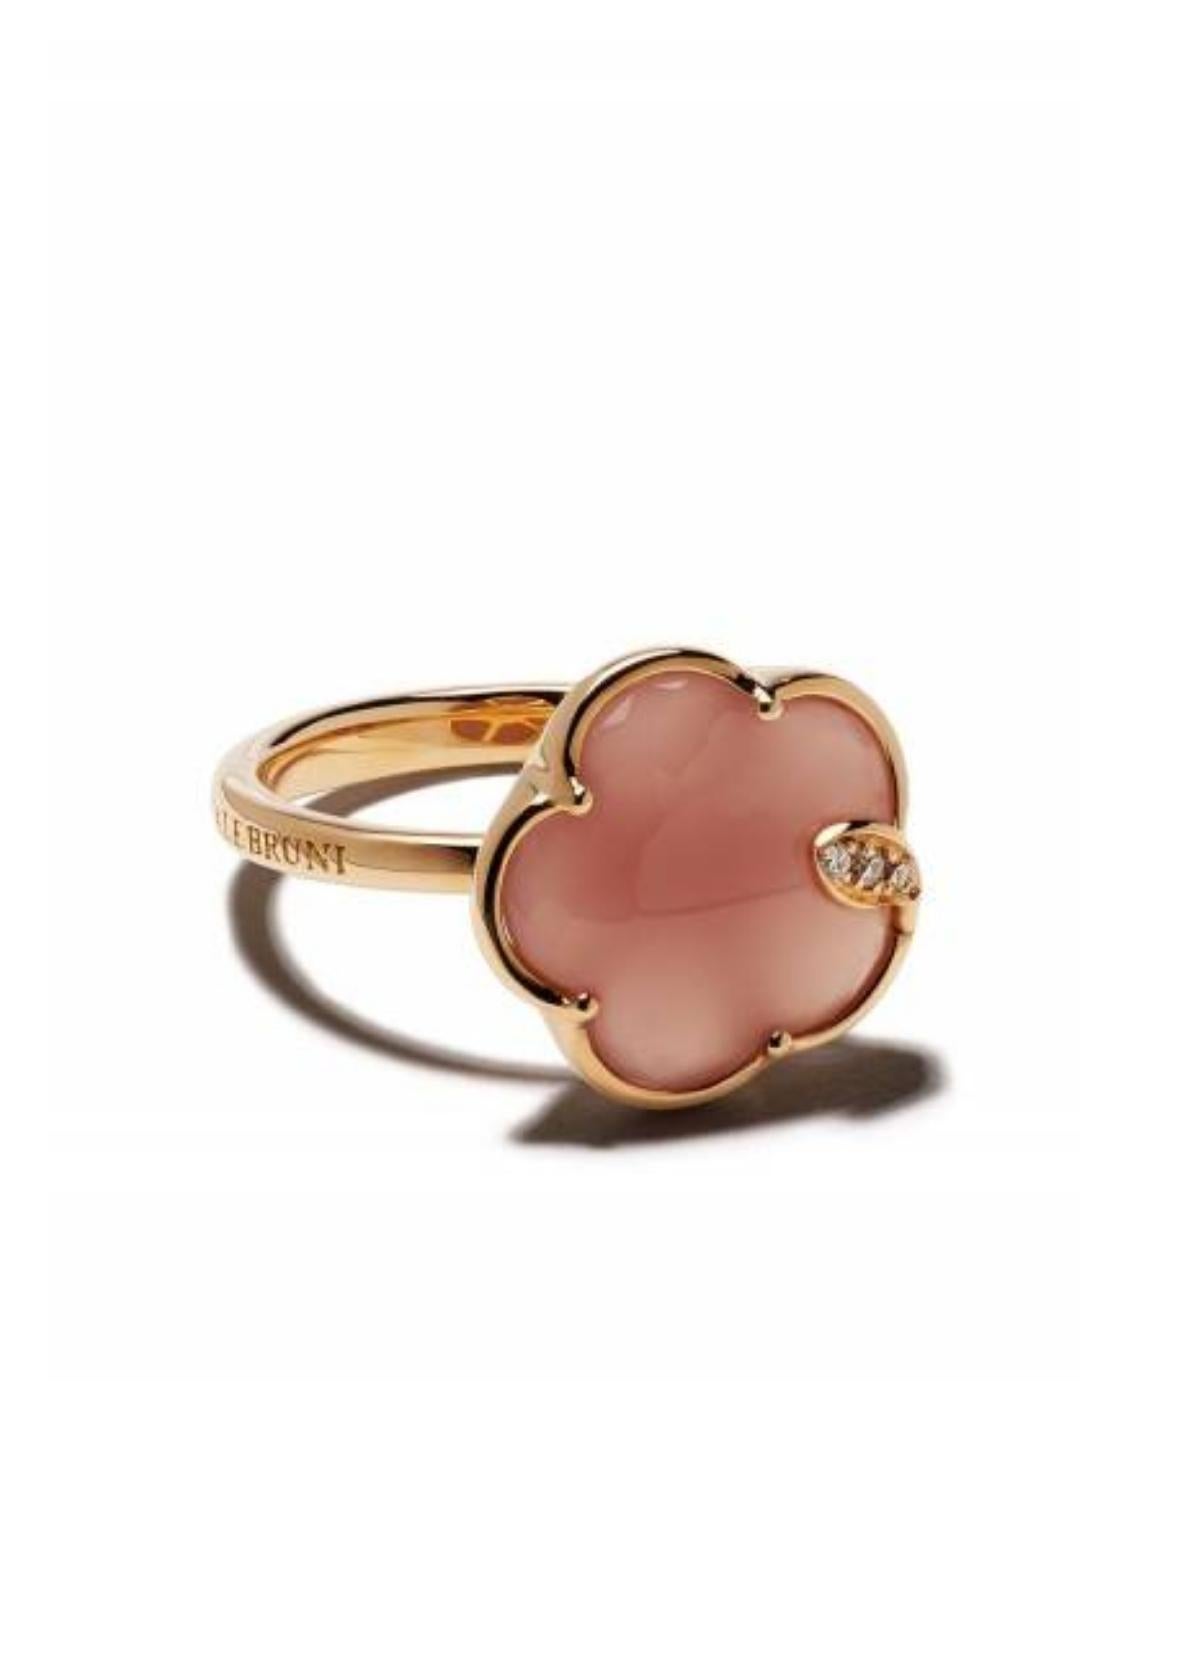 Brilliant Cut PETIT JOLI RING with Pink Chalcedony and Diamonds  16116R For Sale